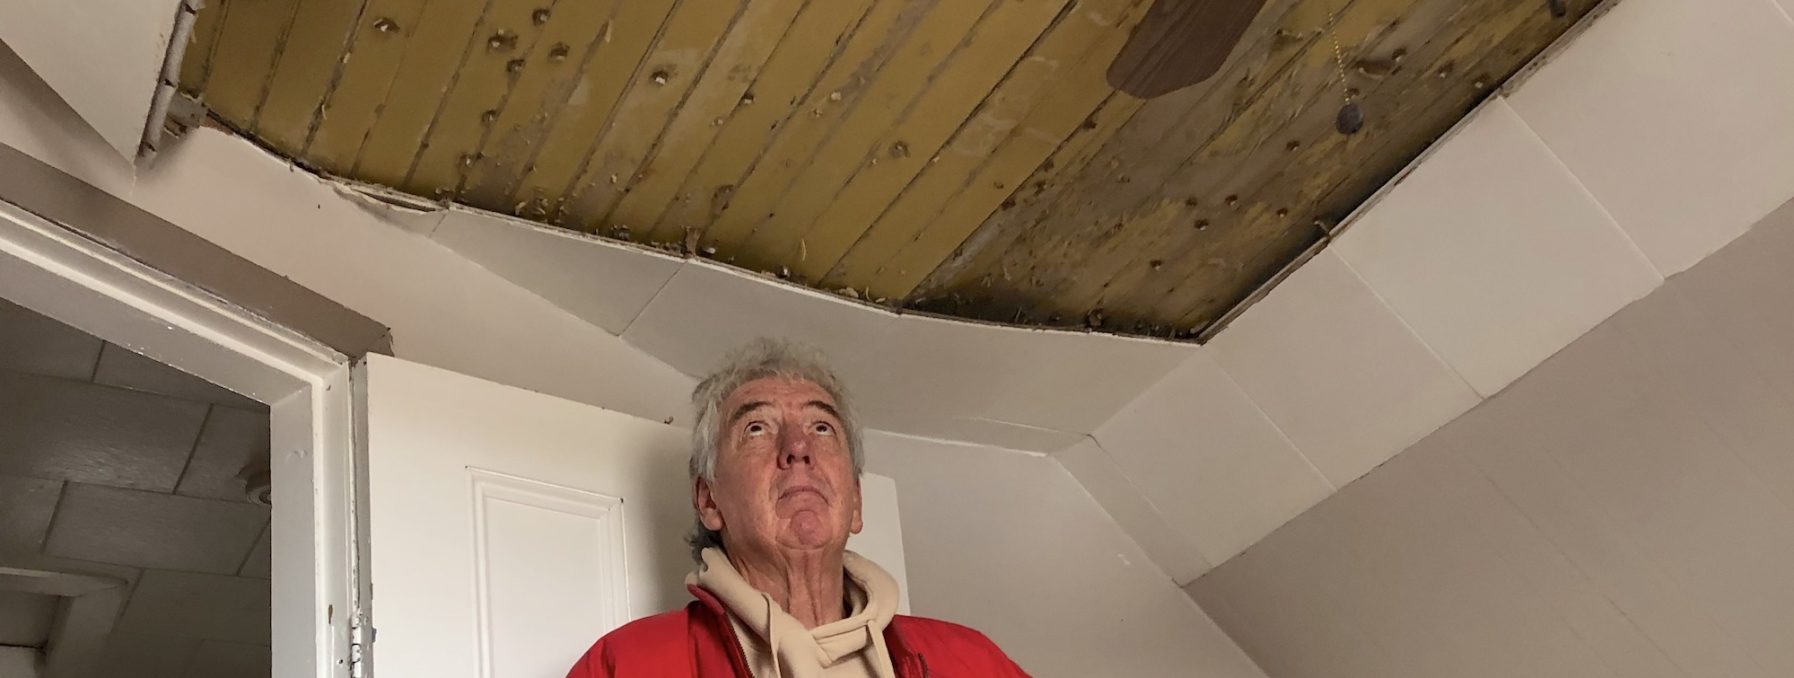 James Towers stares up at a damaged ceiling in Nova Scotia